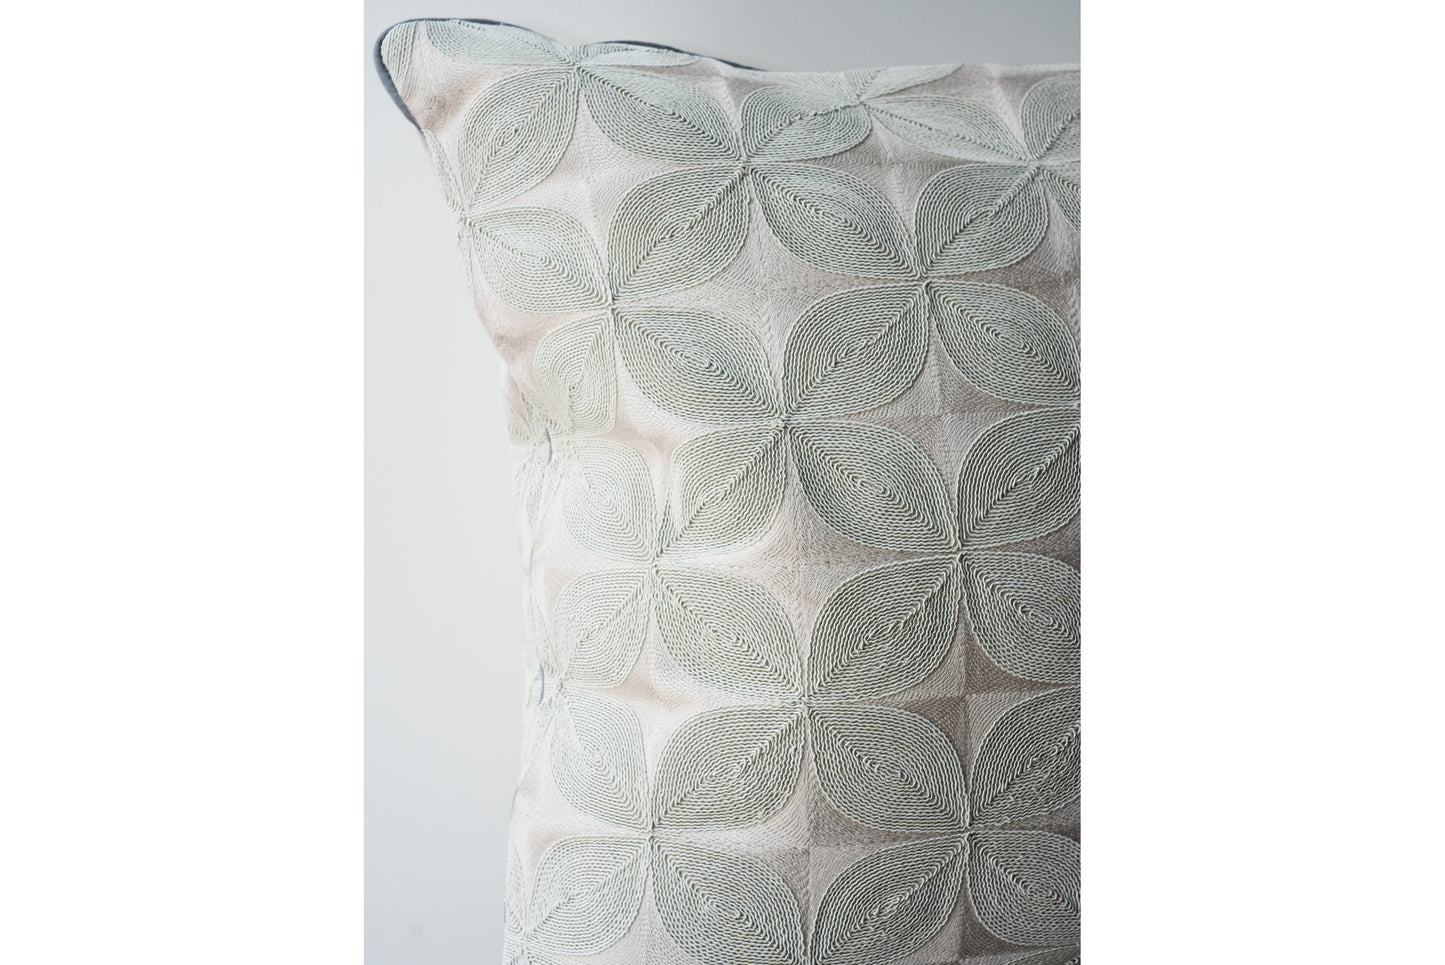 Embroidered Fabric Pillow with Gray Cord Piping - 22 inches square